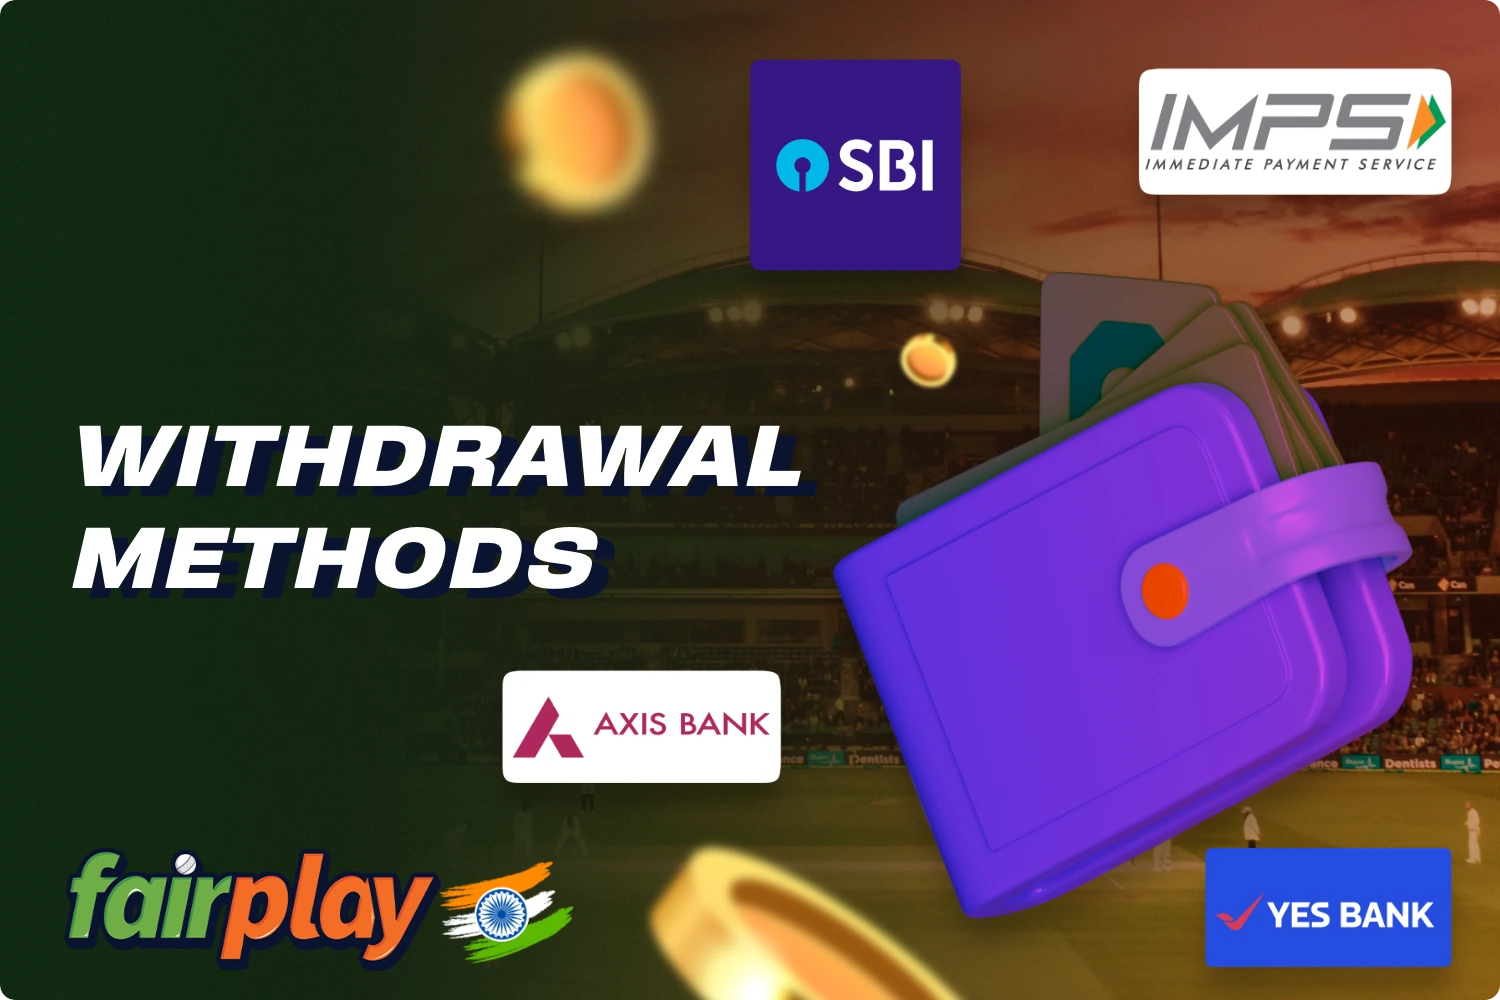 Various withdrawal methods are available to Fairplay users in India